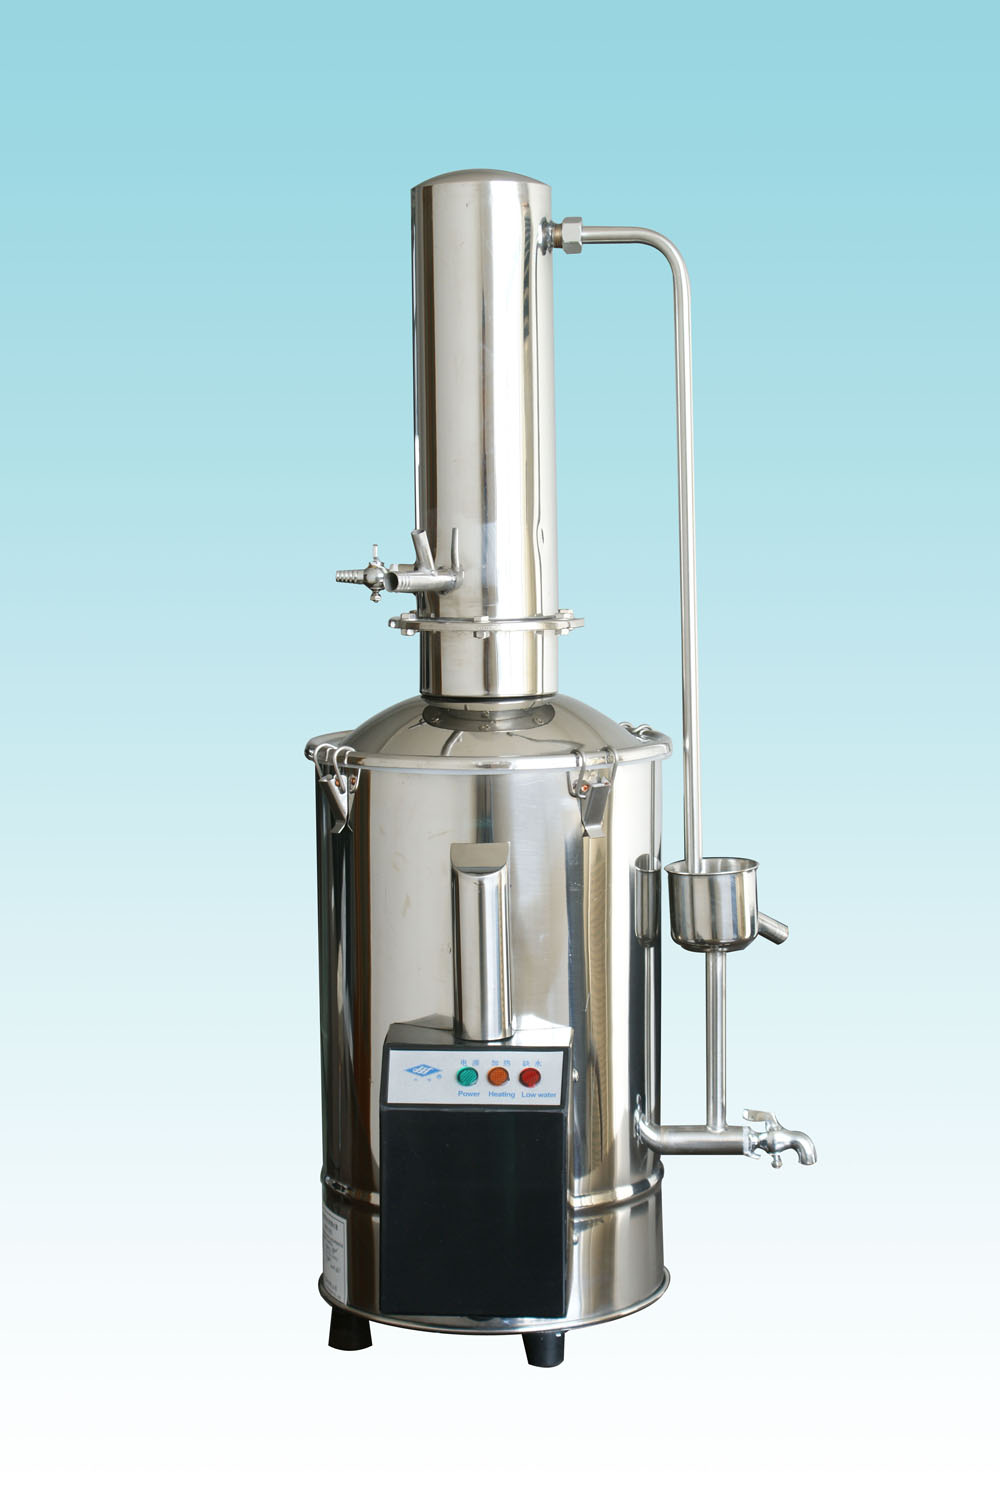 Stainless Steel Electric Distilled Water Device (model DZ-5Z)